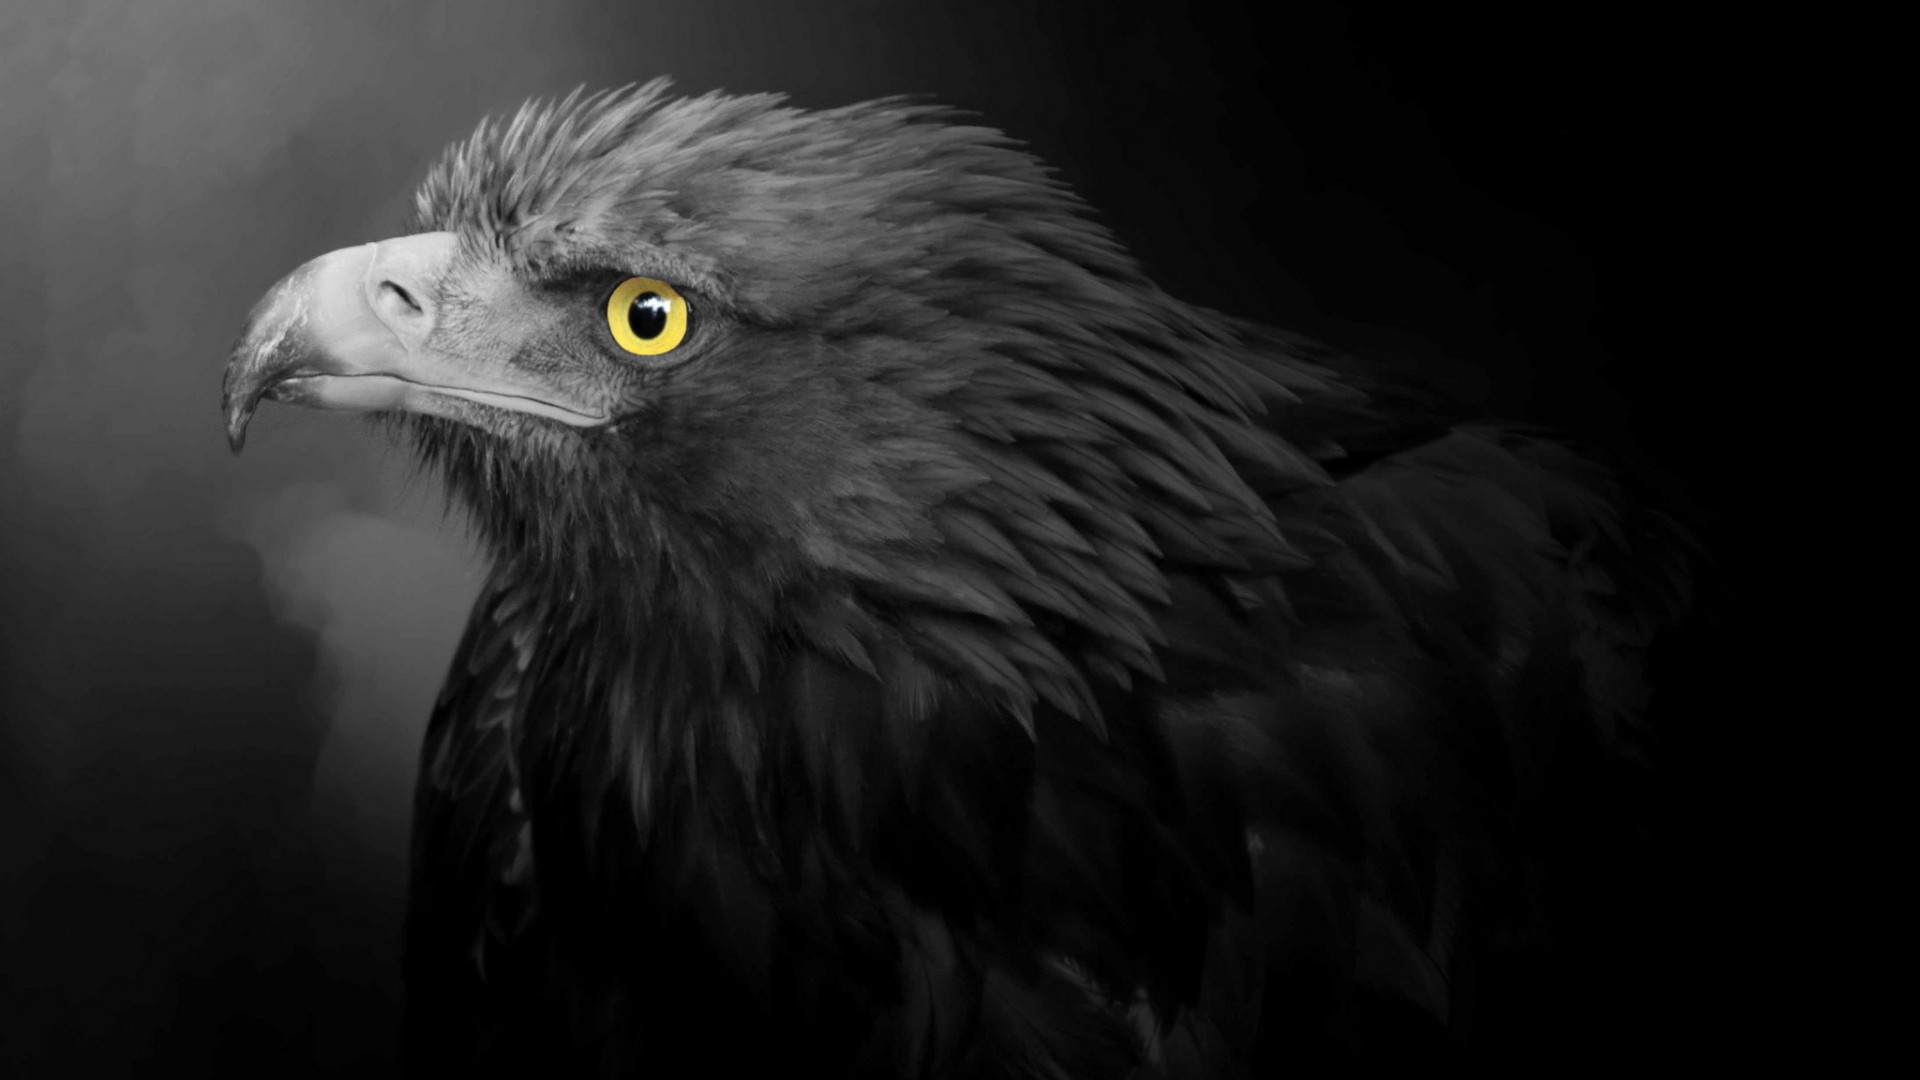  Eagle  HD  Wallpaper  Background Image 1920x1080 ID 